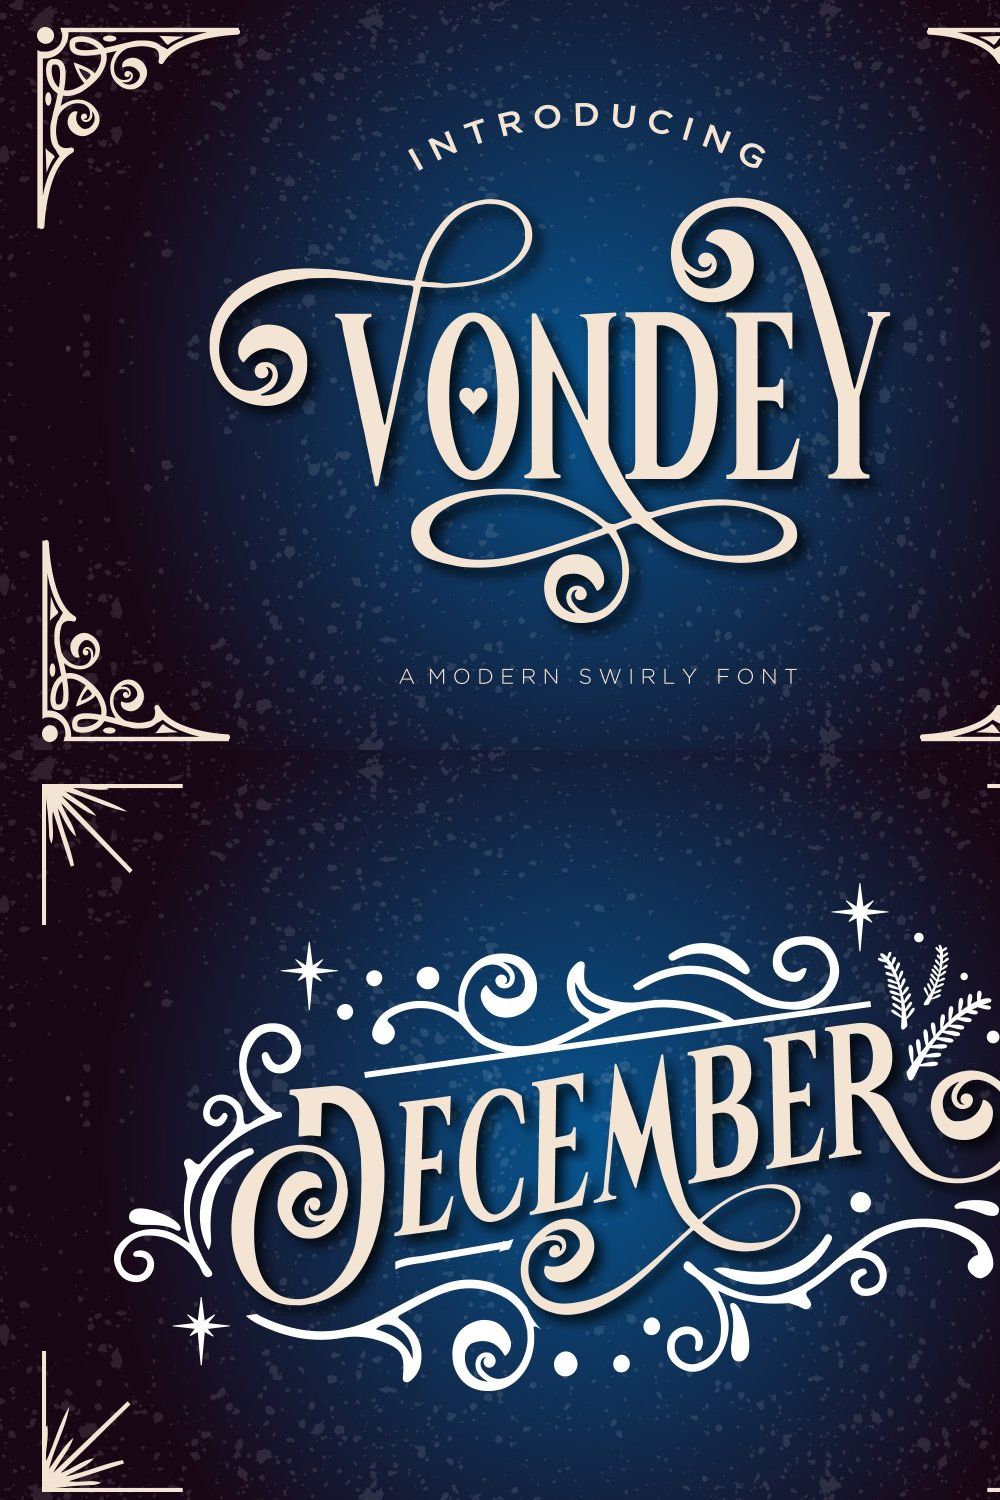 Vondey - Holiday font & ornaments pinterest preview image.